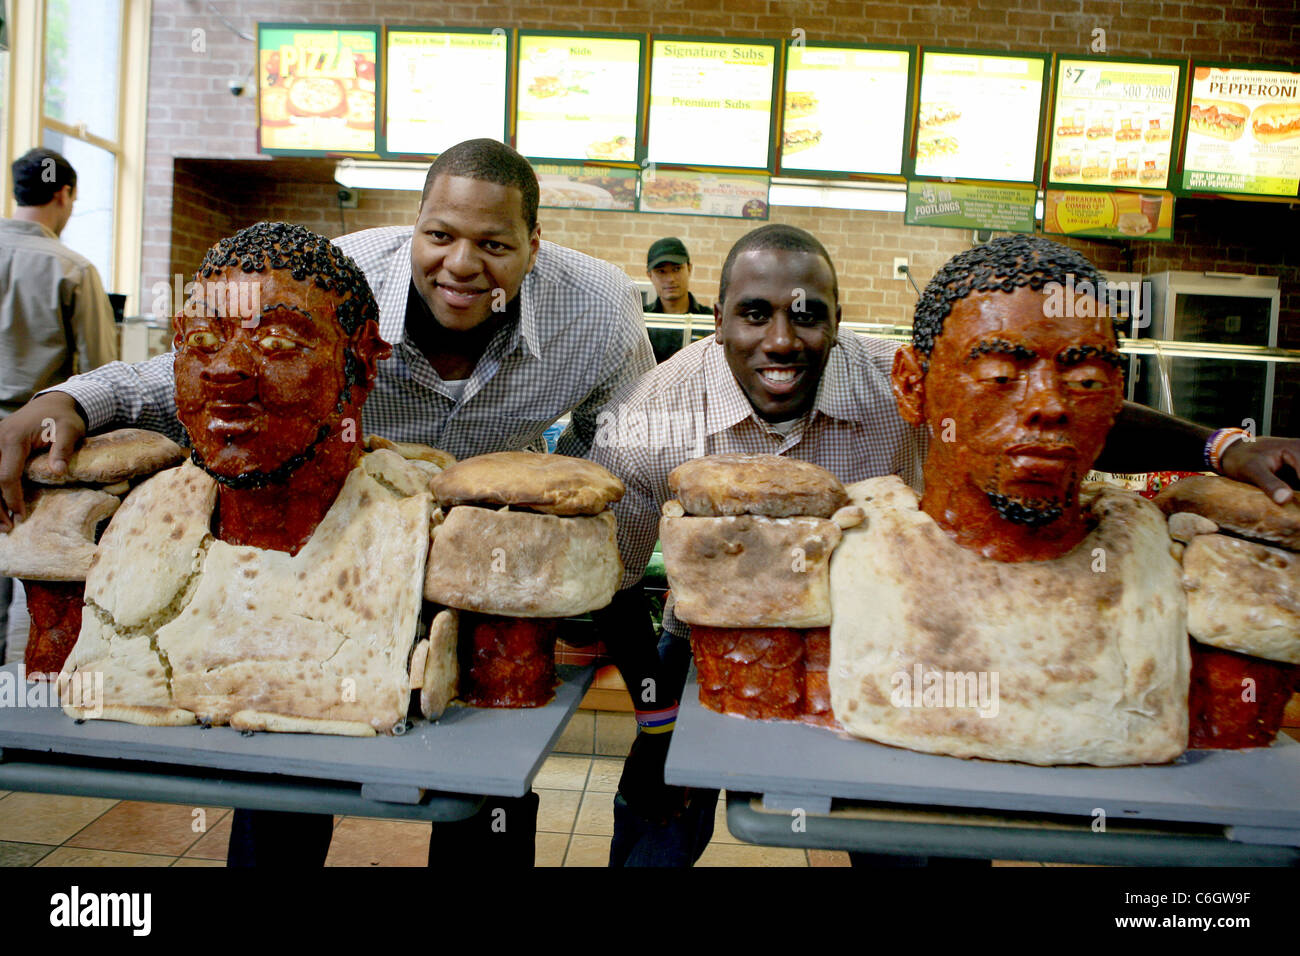 Top NFL draft prospects Ndamukong Suh and C. J. Spiller unveil their life-size busts made from pepperoni at Subway sandwich Stock Photo